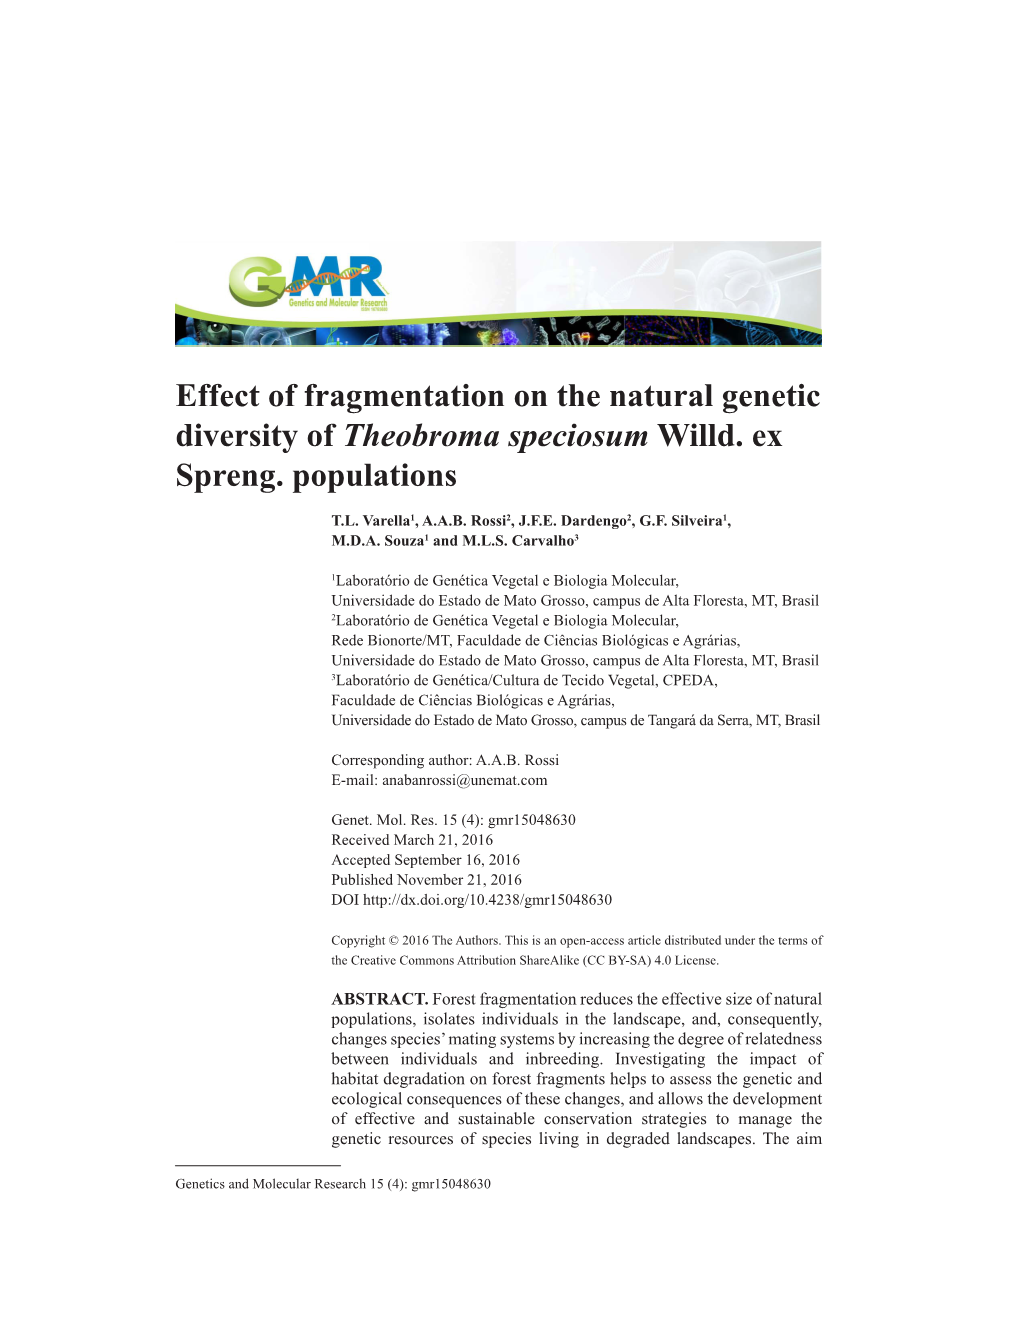 Effect of Fragmentation on the Natural Genetic Diversity of Theobroma Speciosum Willd